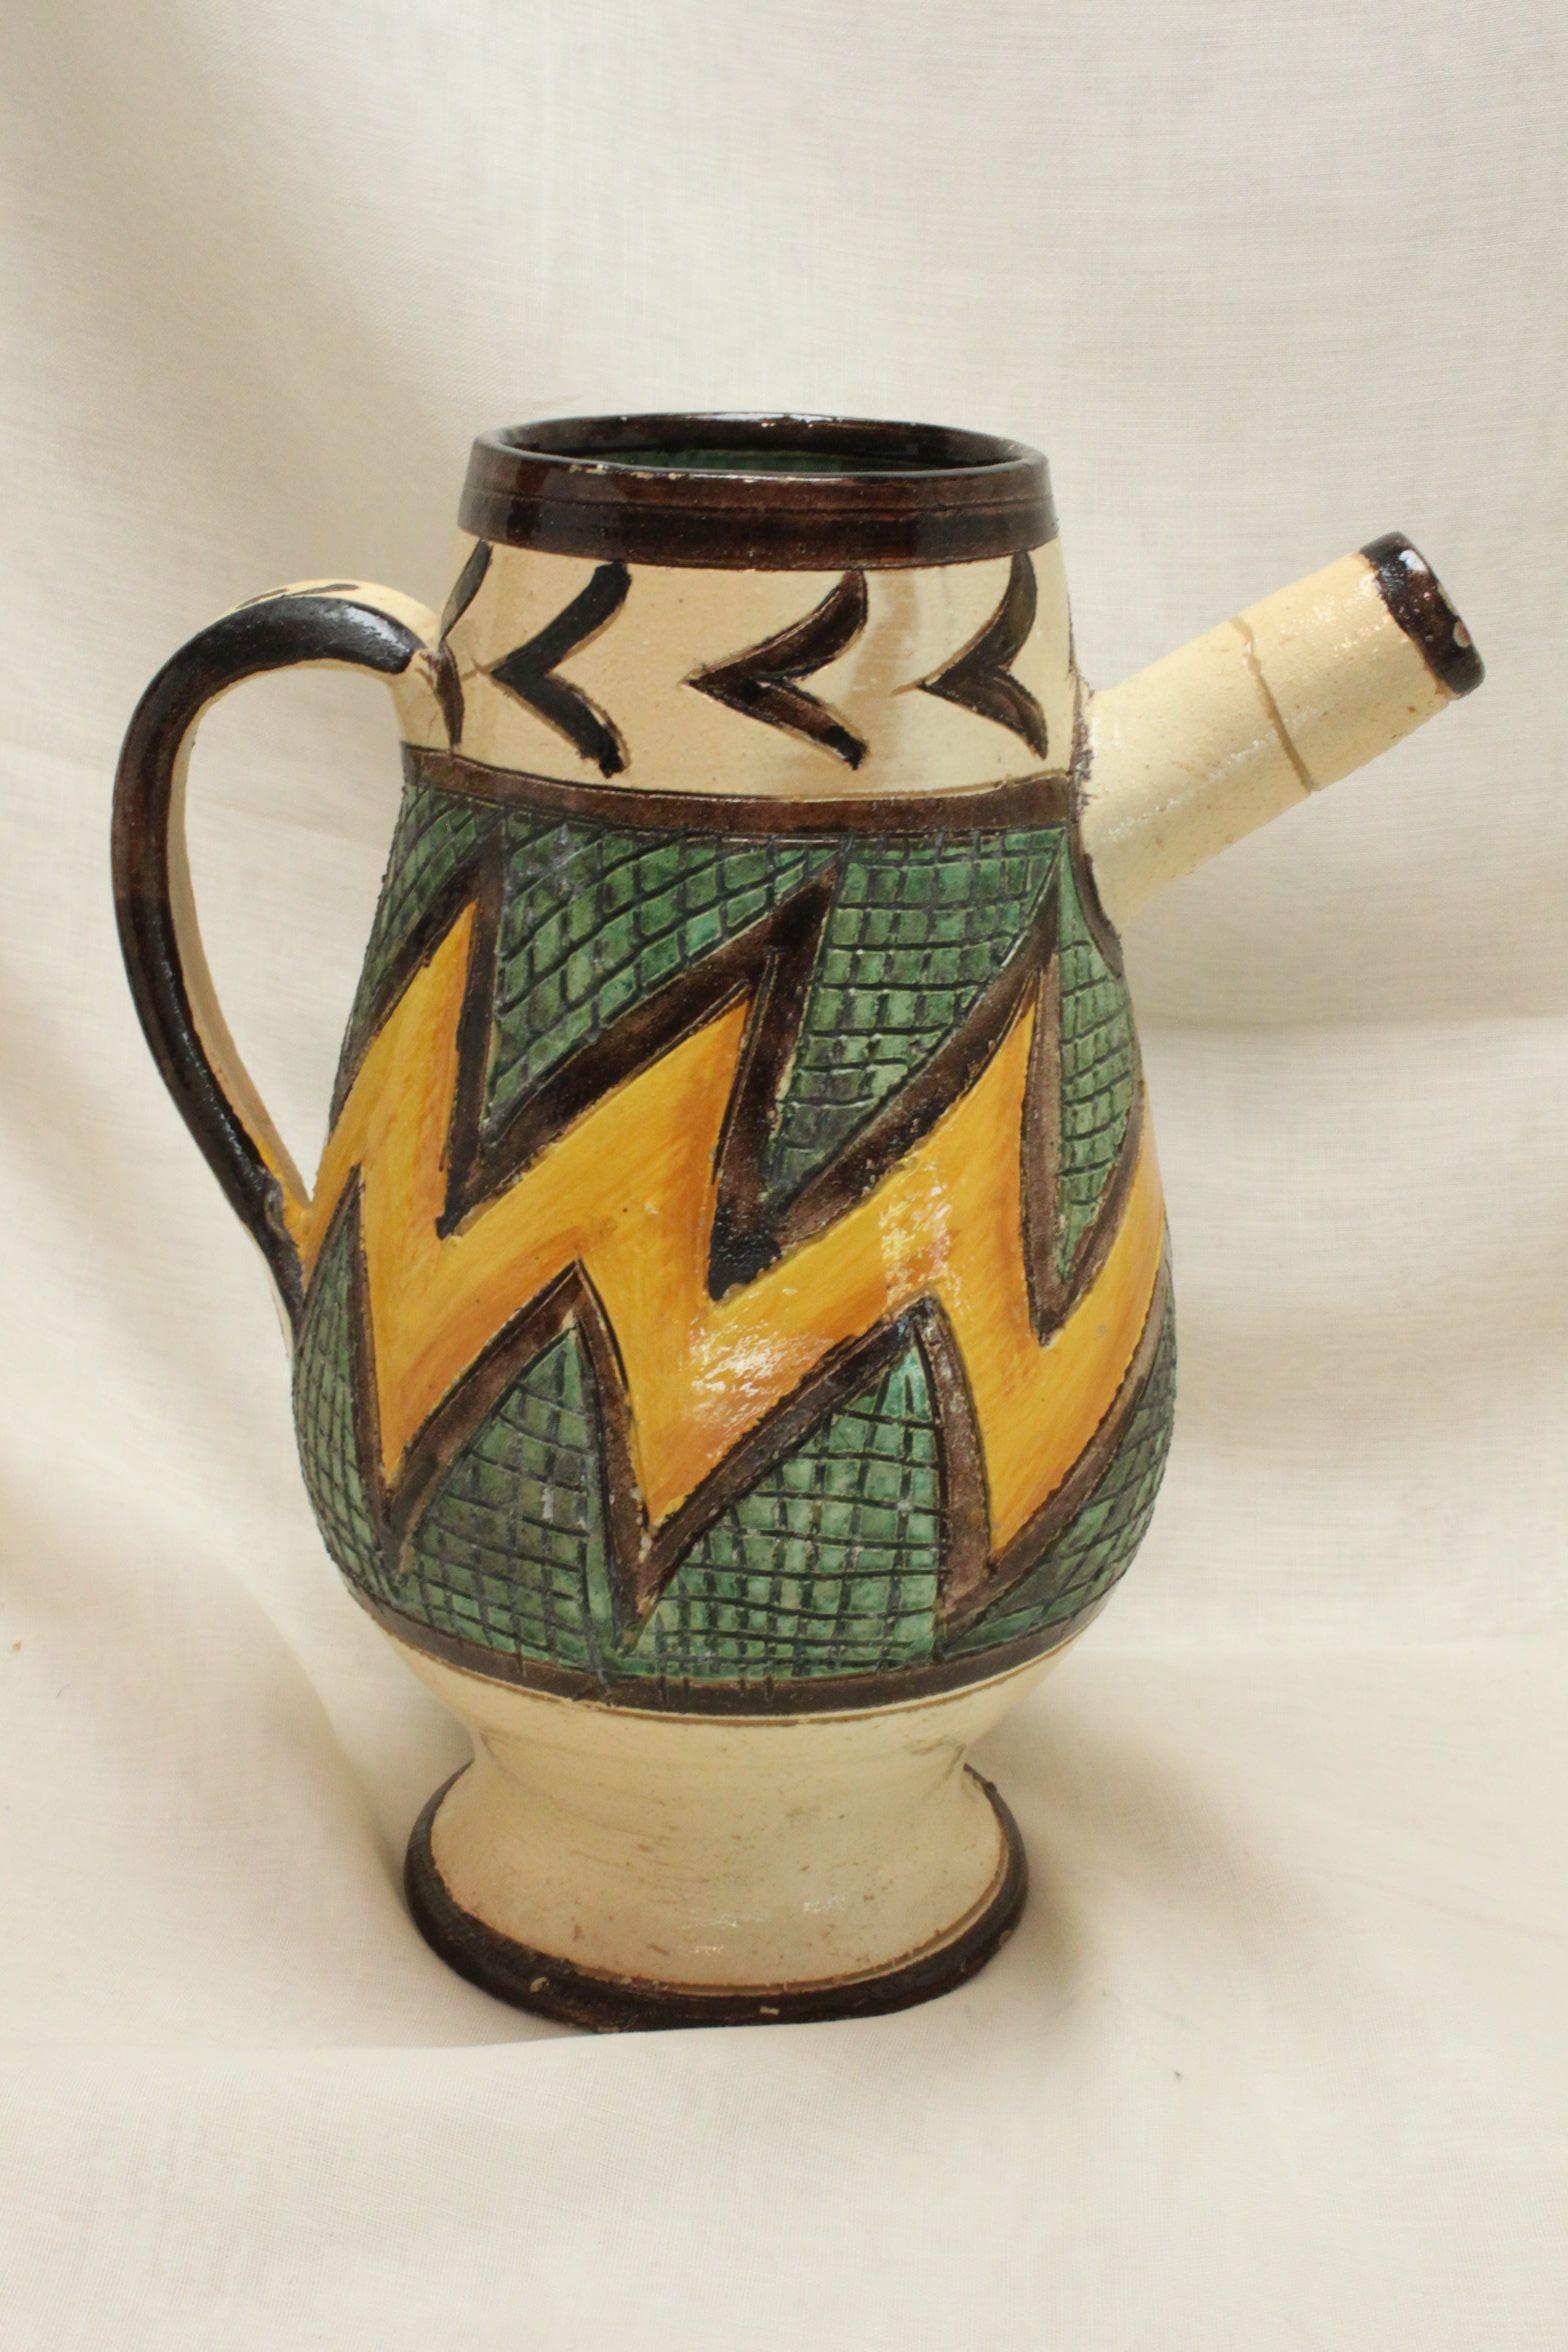 Jug or Pitcher by Ugo Zaccagnini In Good Condition For Sale In East Geelong, VIC